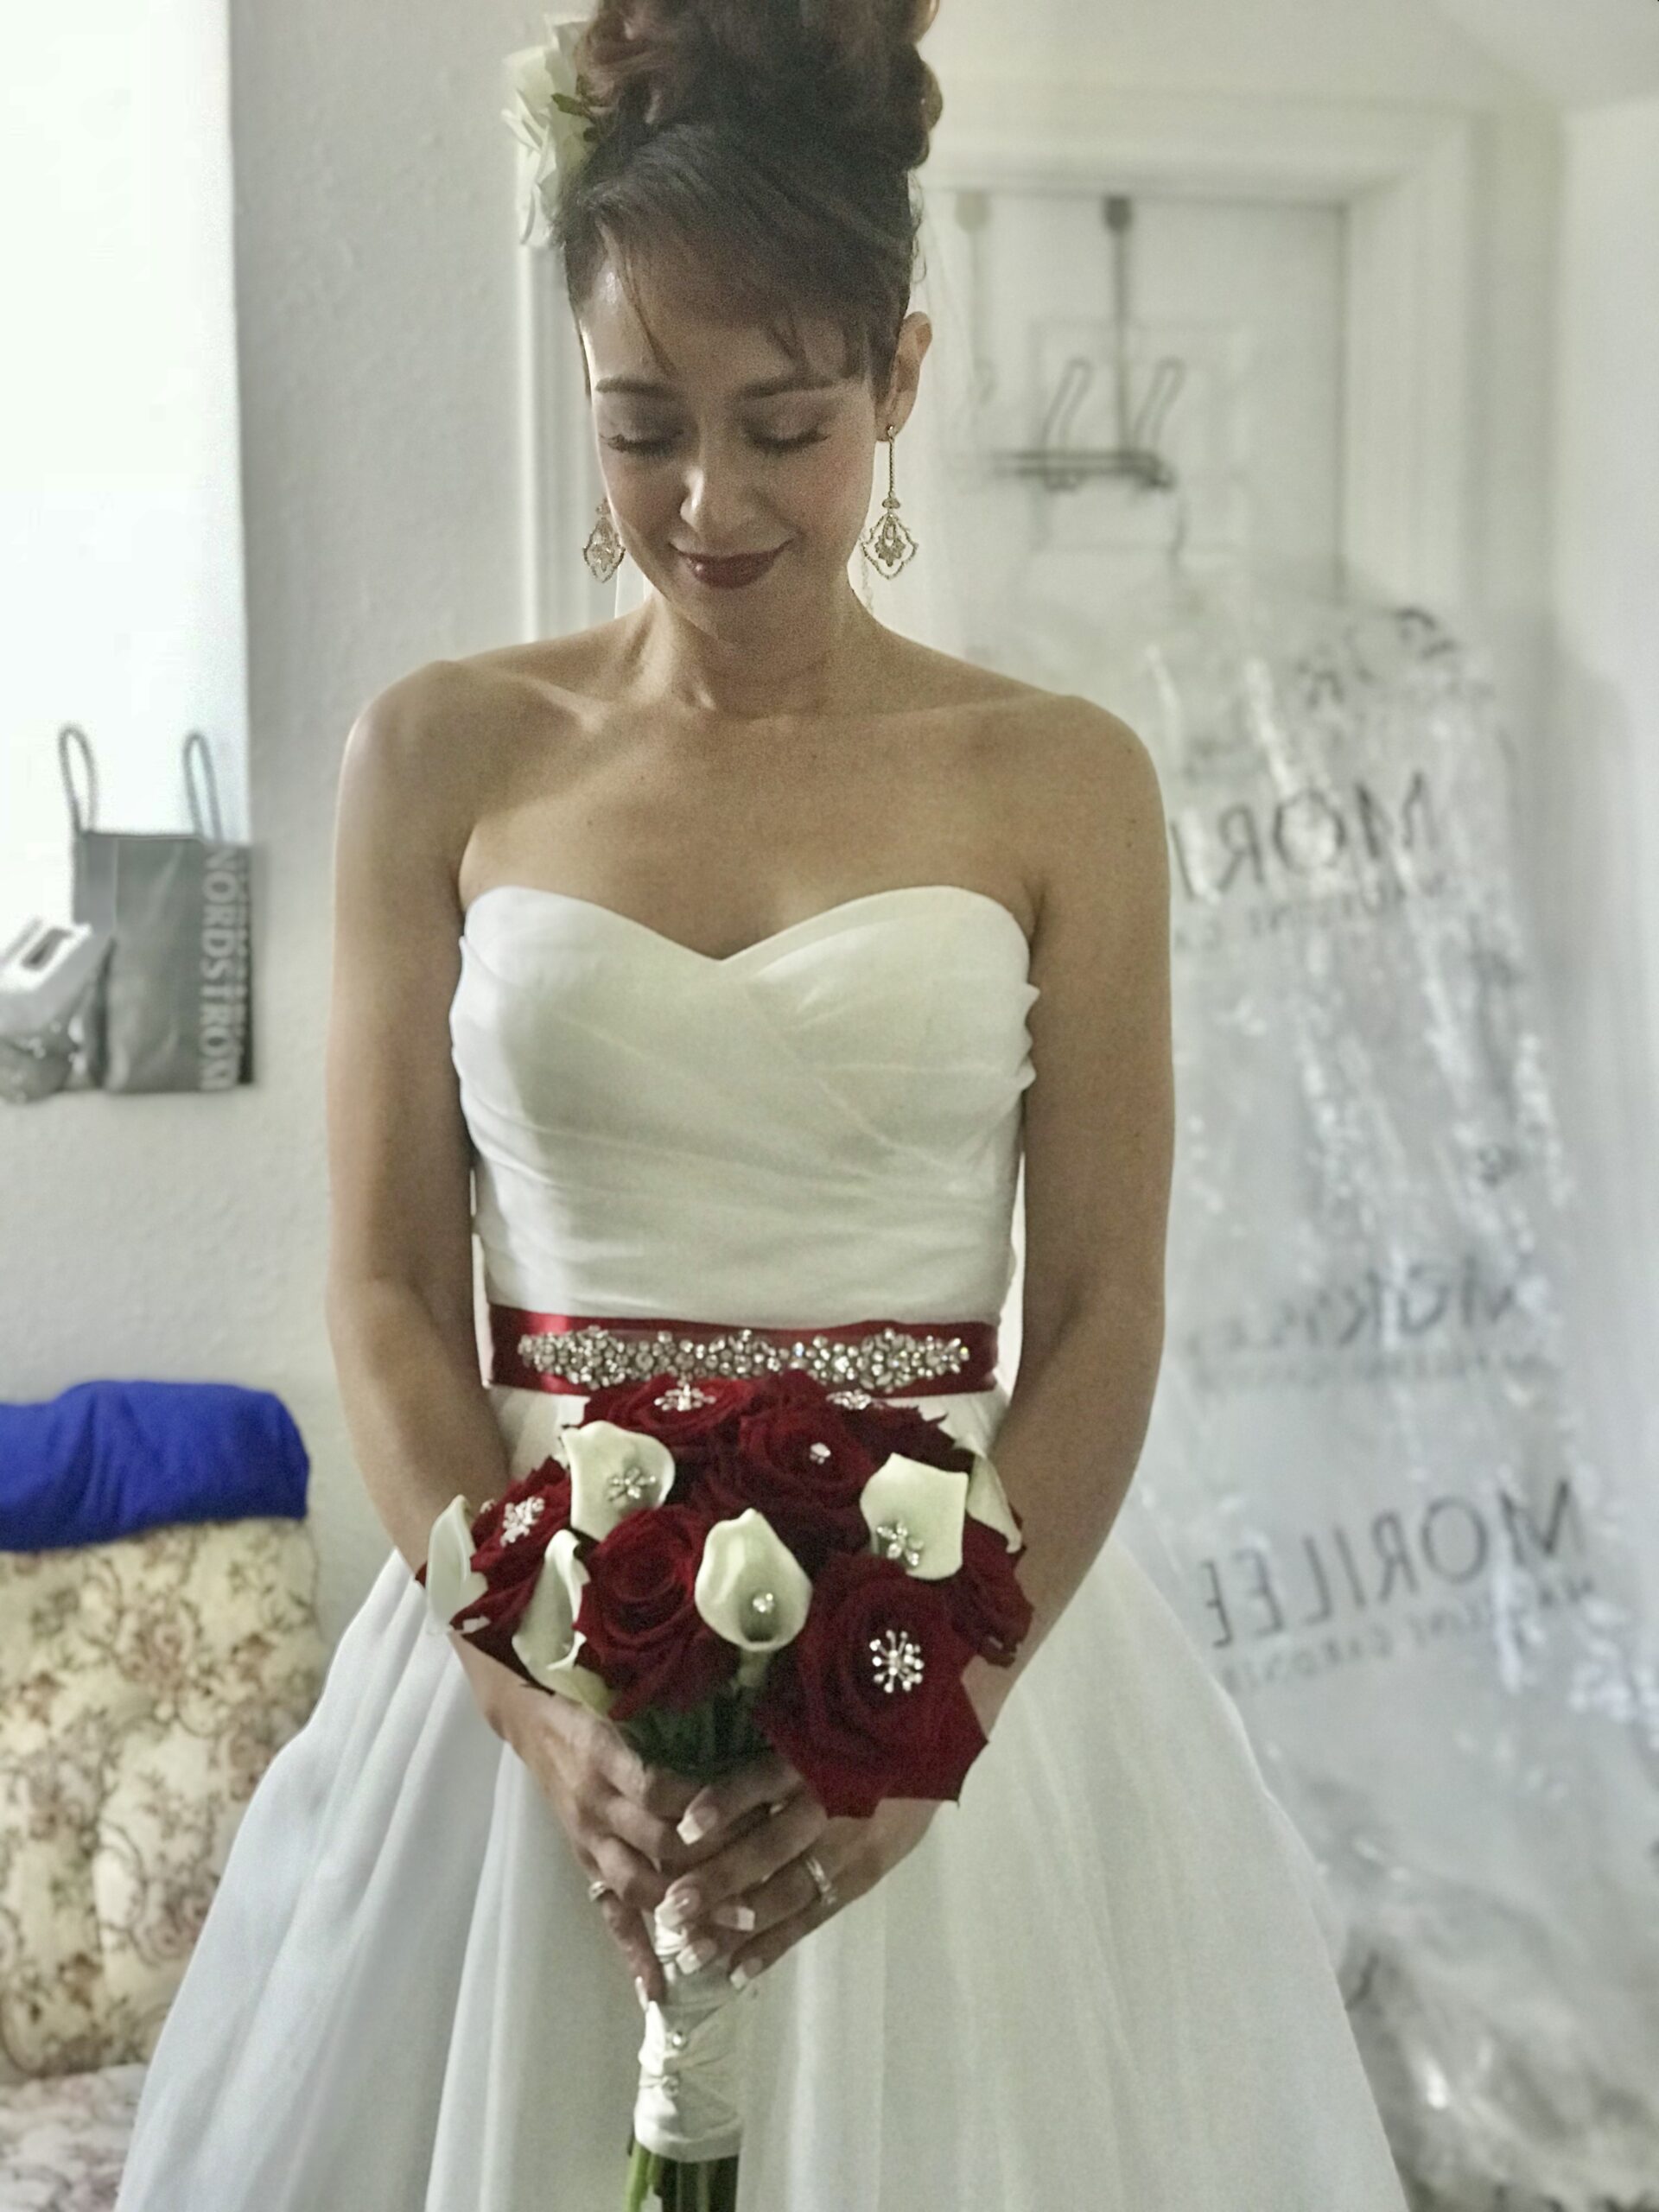 A bride holding her bouquet of flowers in front of the mirror.